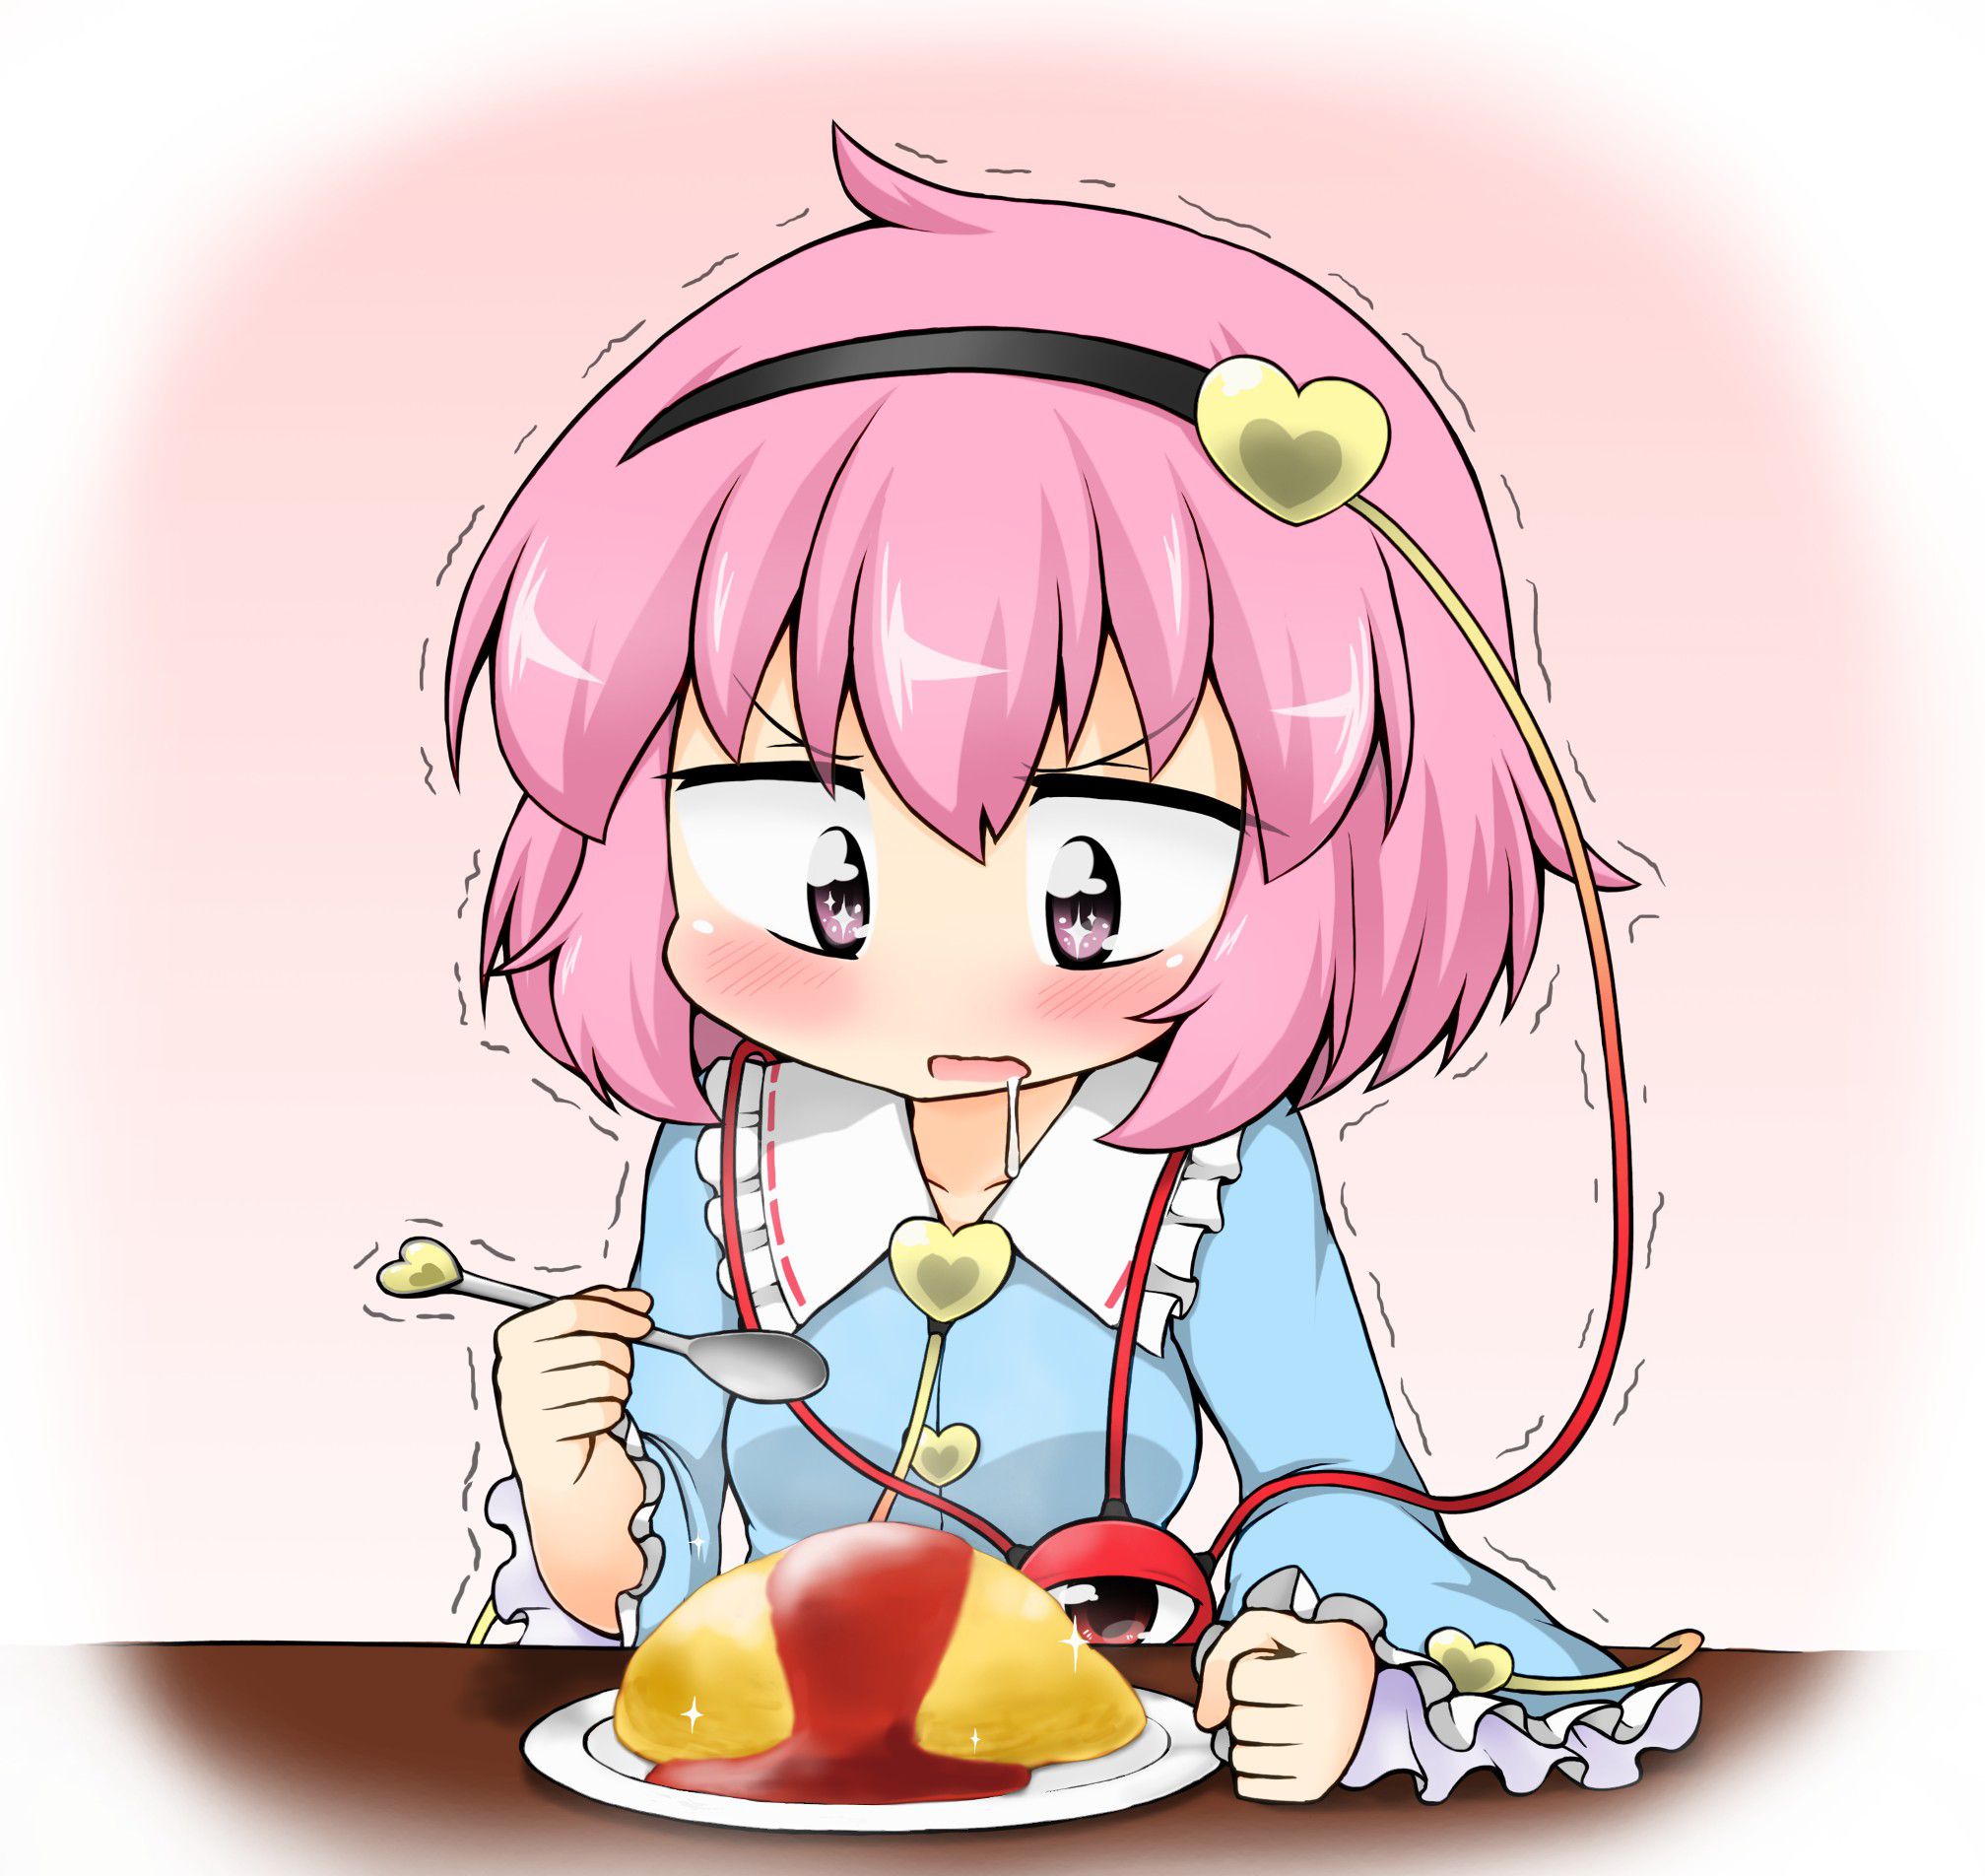 Secondary image summary of the girl eating delicious food! 3